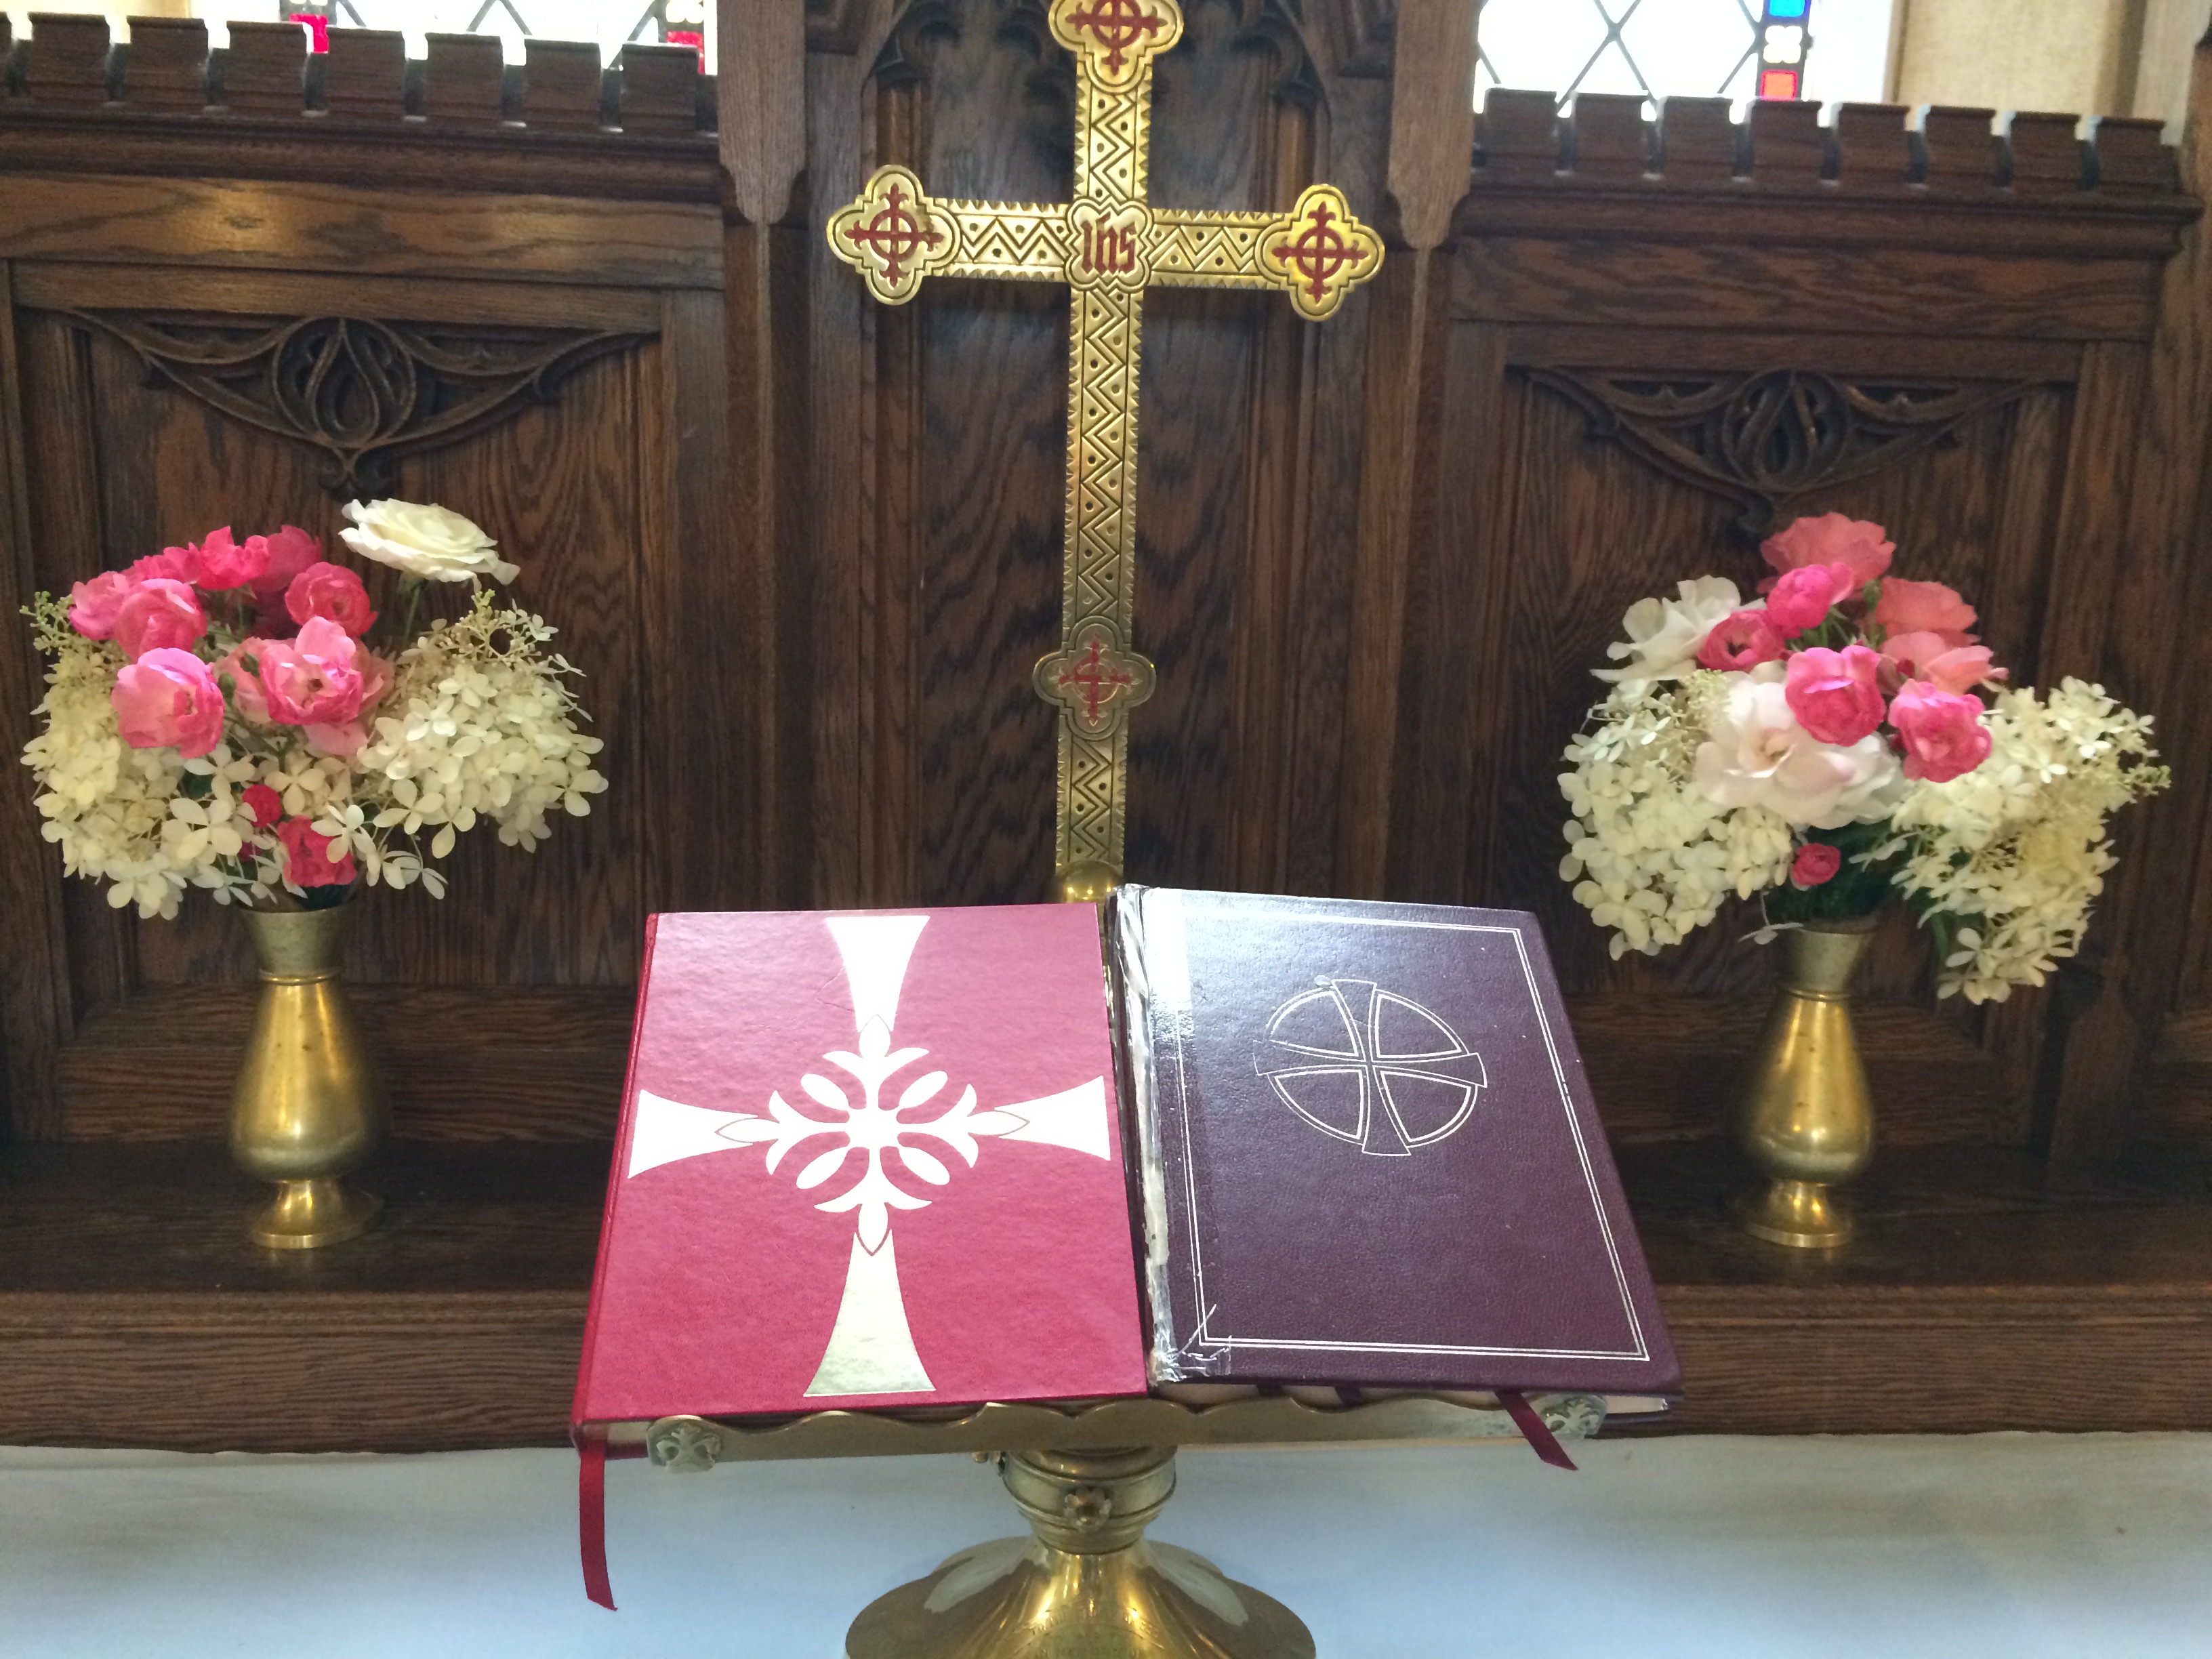 Sunday, August 14th at St. Luke's: Flowers on the Altar.